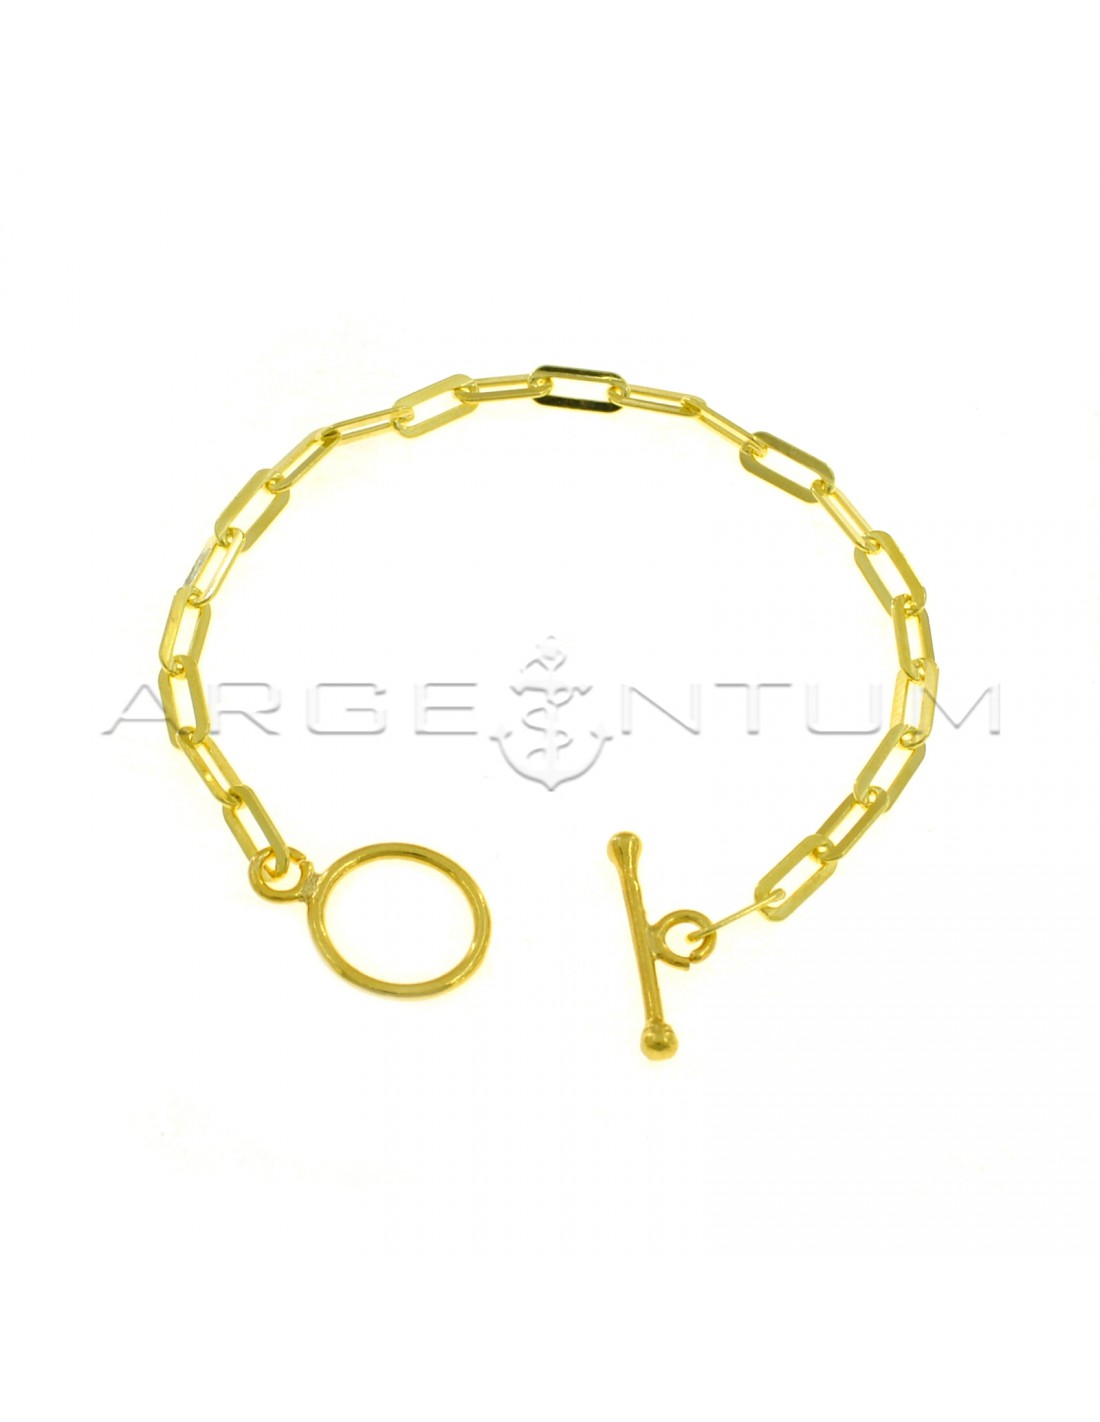 Biscuit mesh bracelet with yellow gold plated T-bar clasp in 925